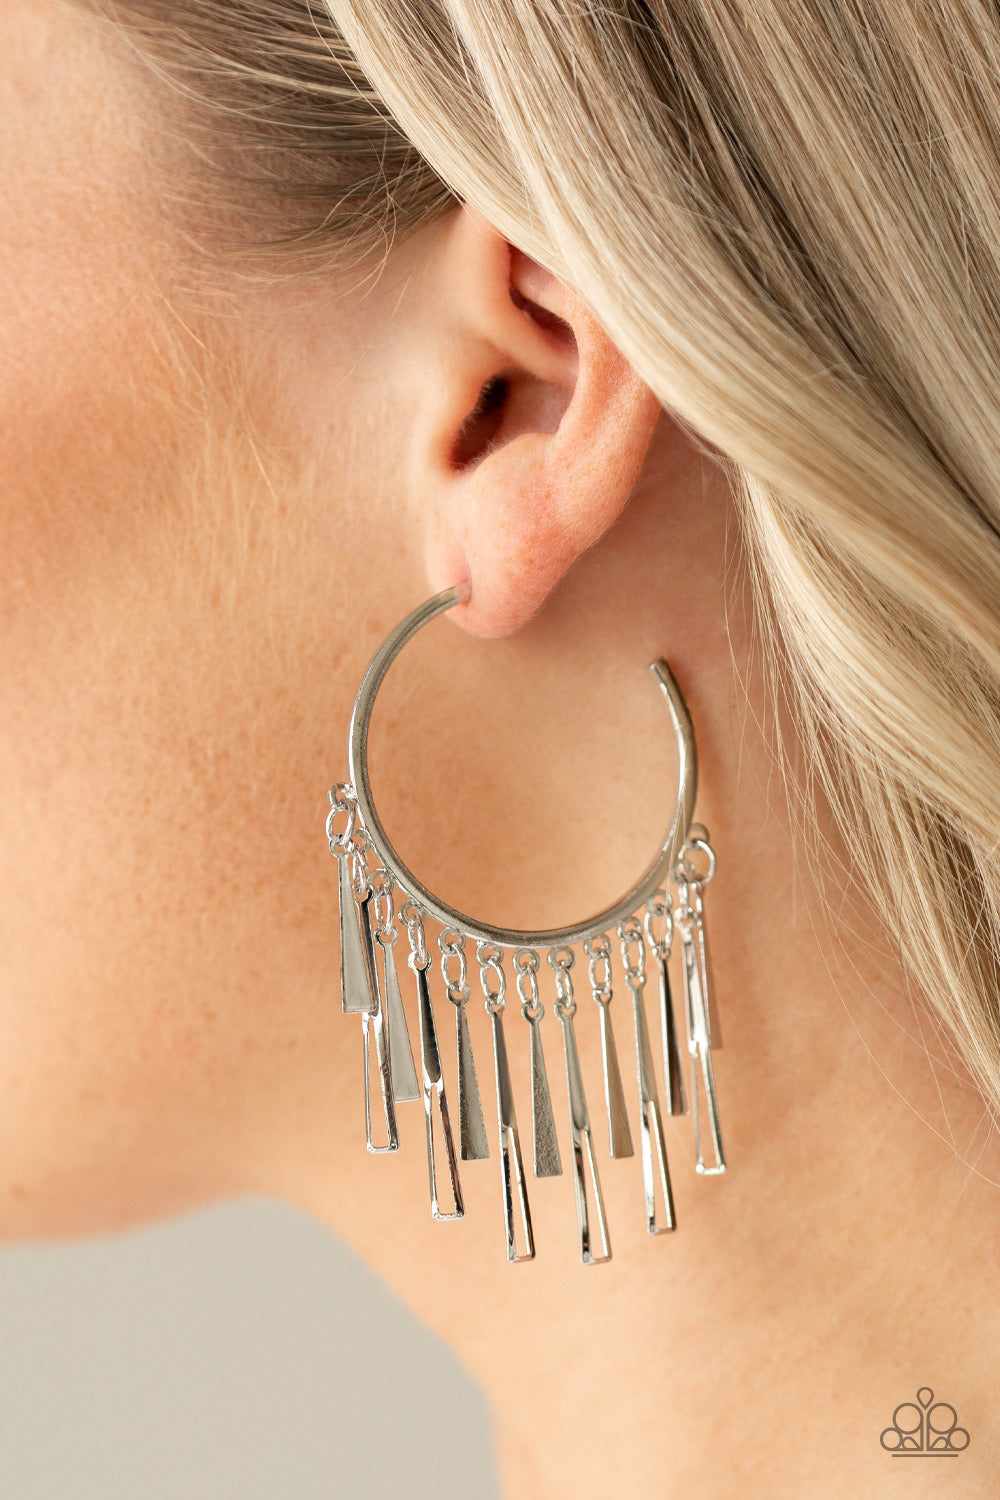 Bring The Noise Silver-Earrings